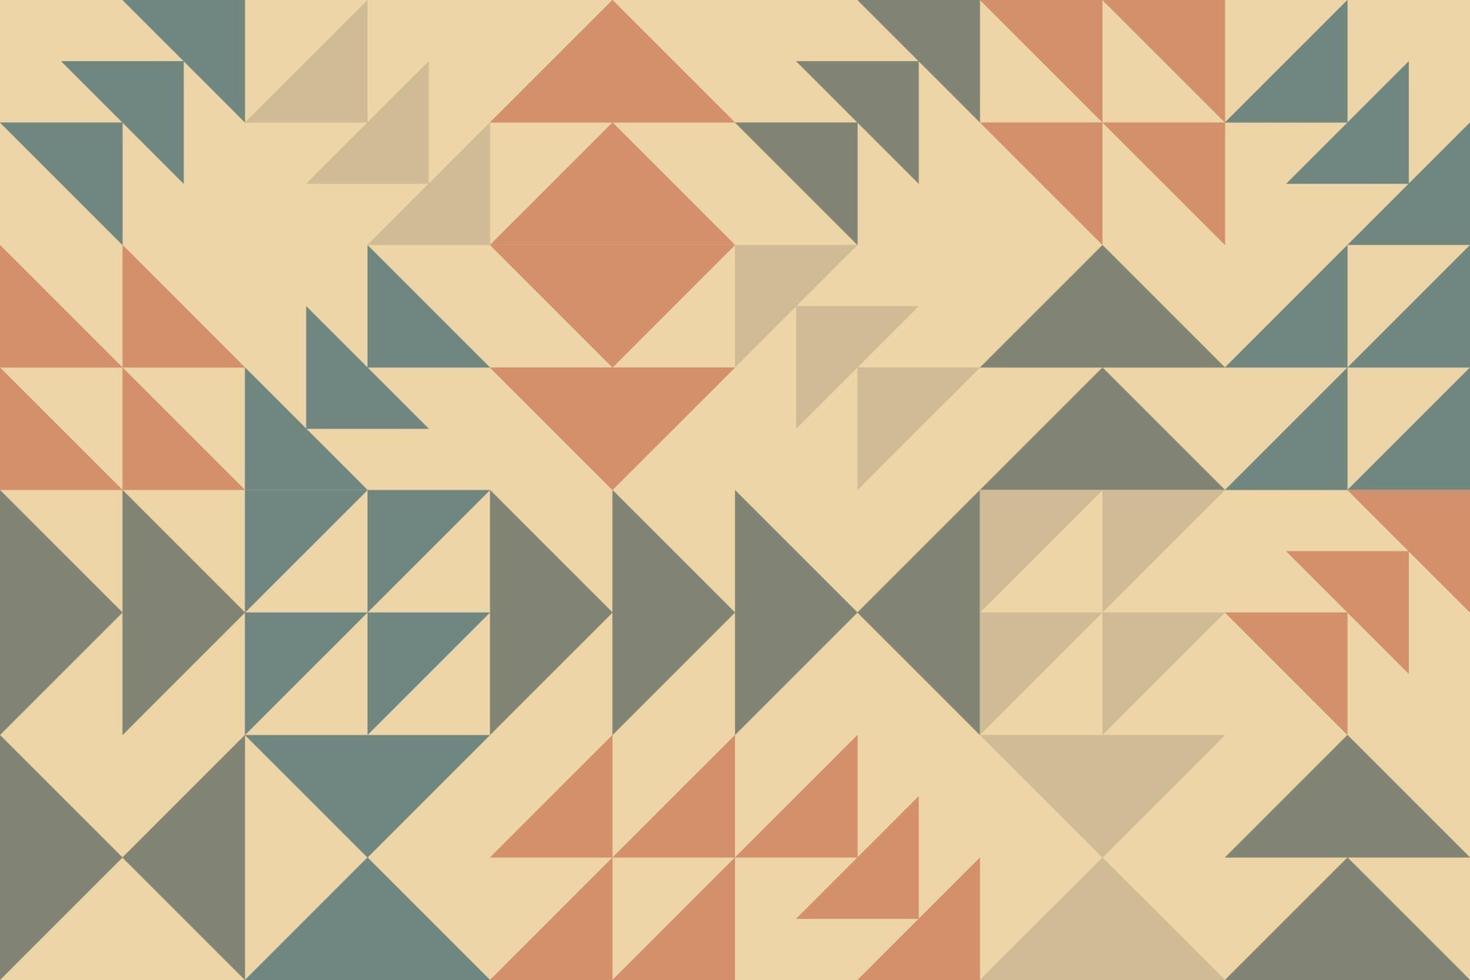 Abstract tileable decorative arrows seamless pattern design. Geometric colorful mosaic backdrop design in retro style vector